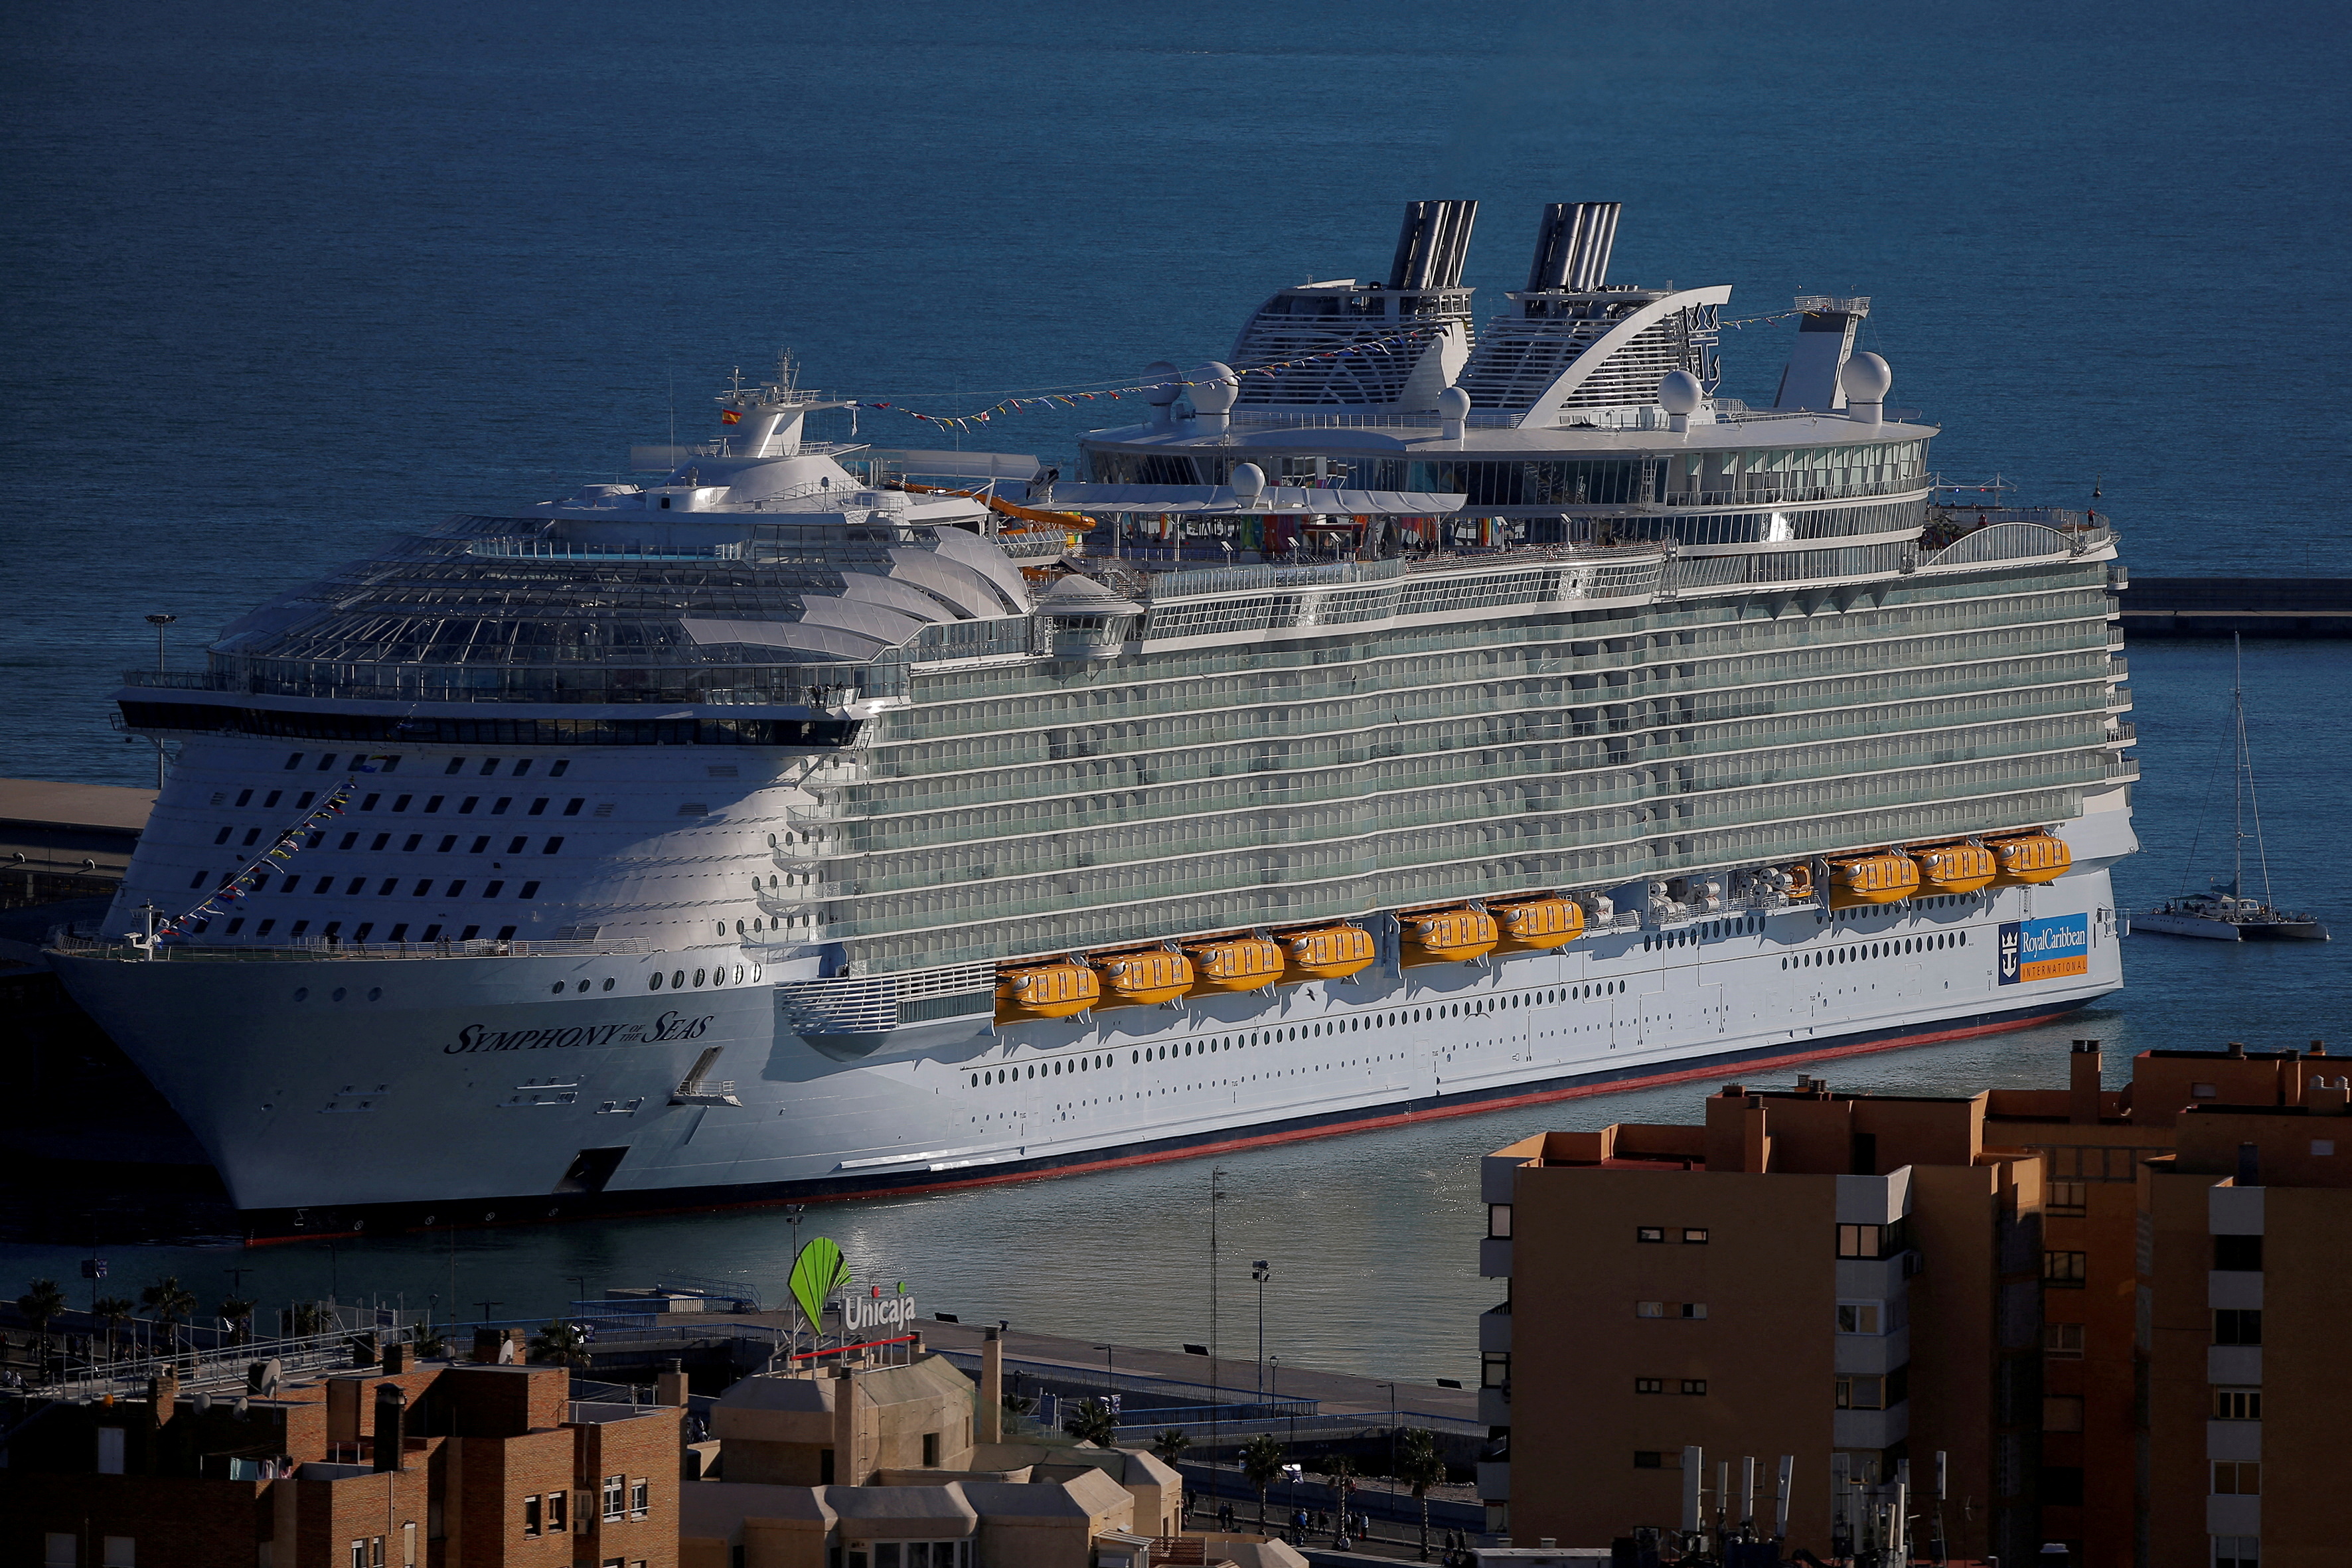 Symphony of the Seas during its world presentation ceremony, berthed at Malaga port